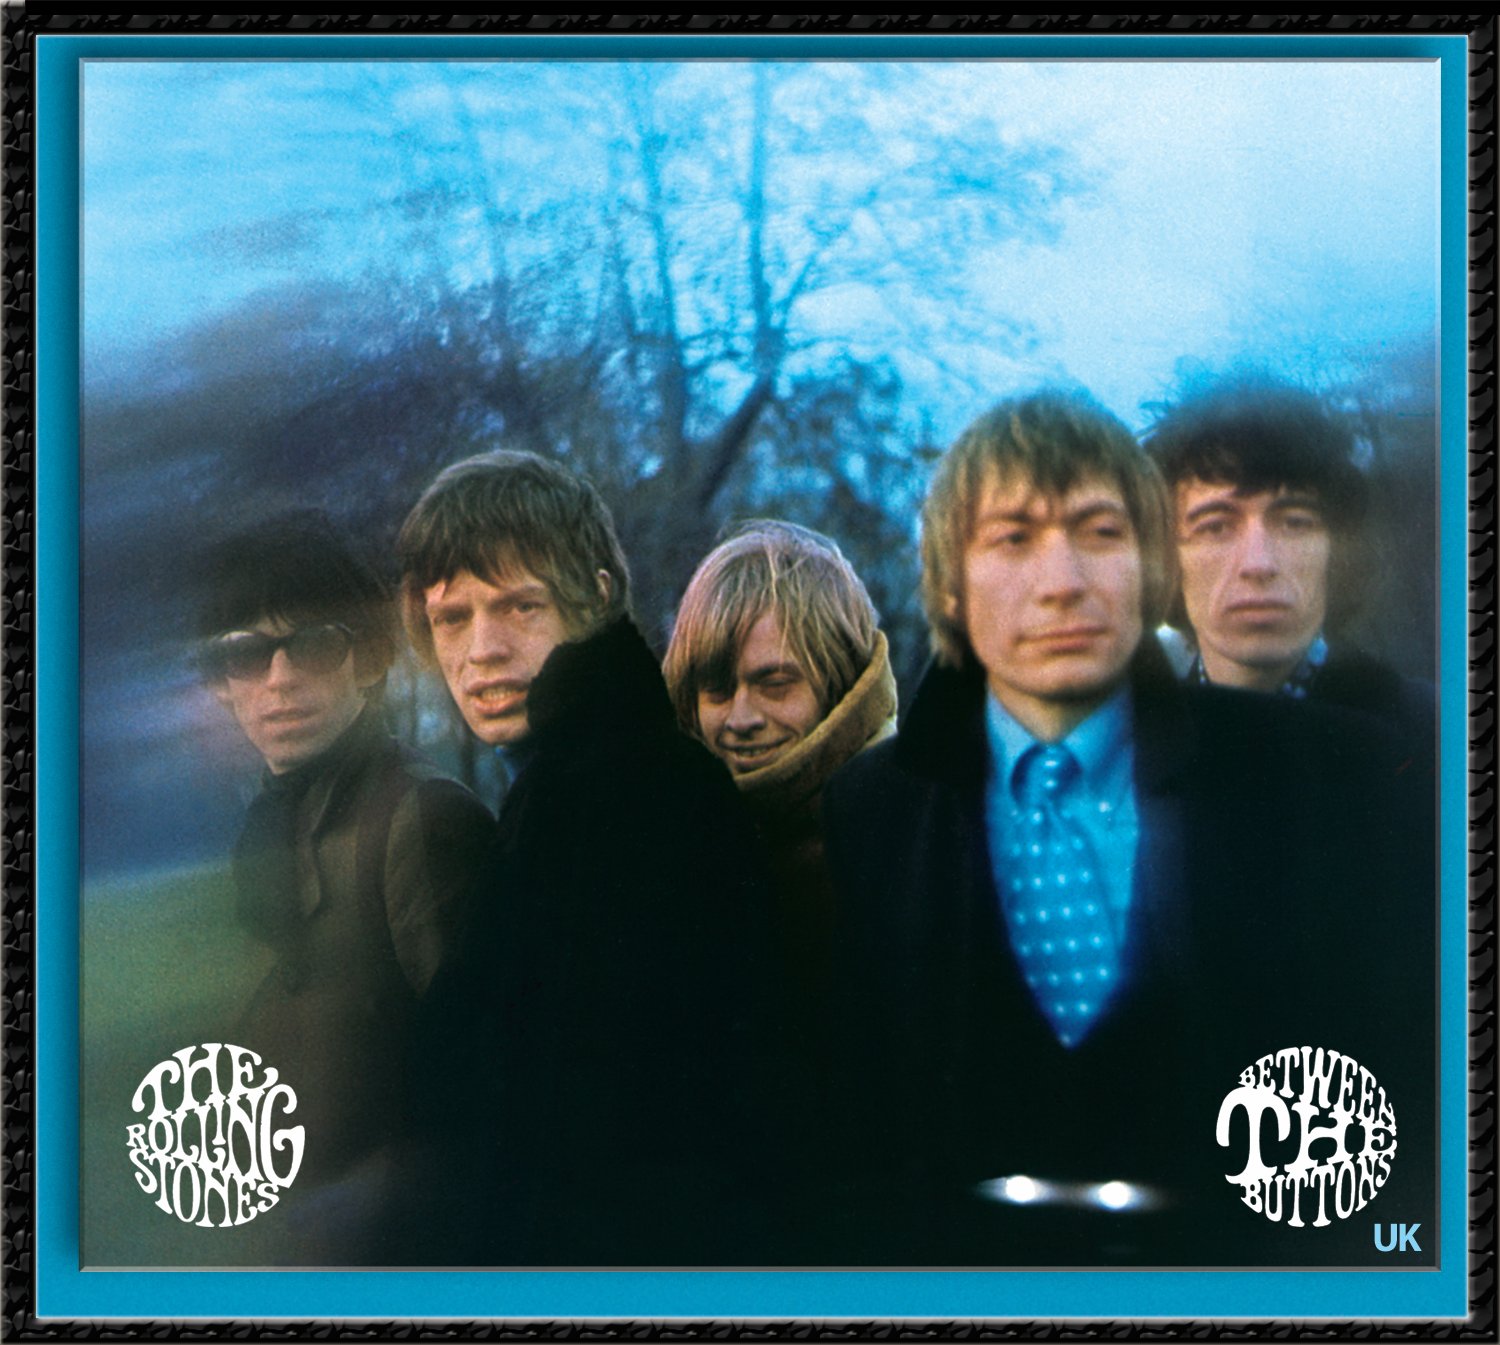 BETWEEN THE BUTTONS (UK) (RMST)